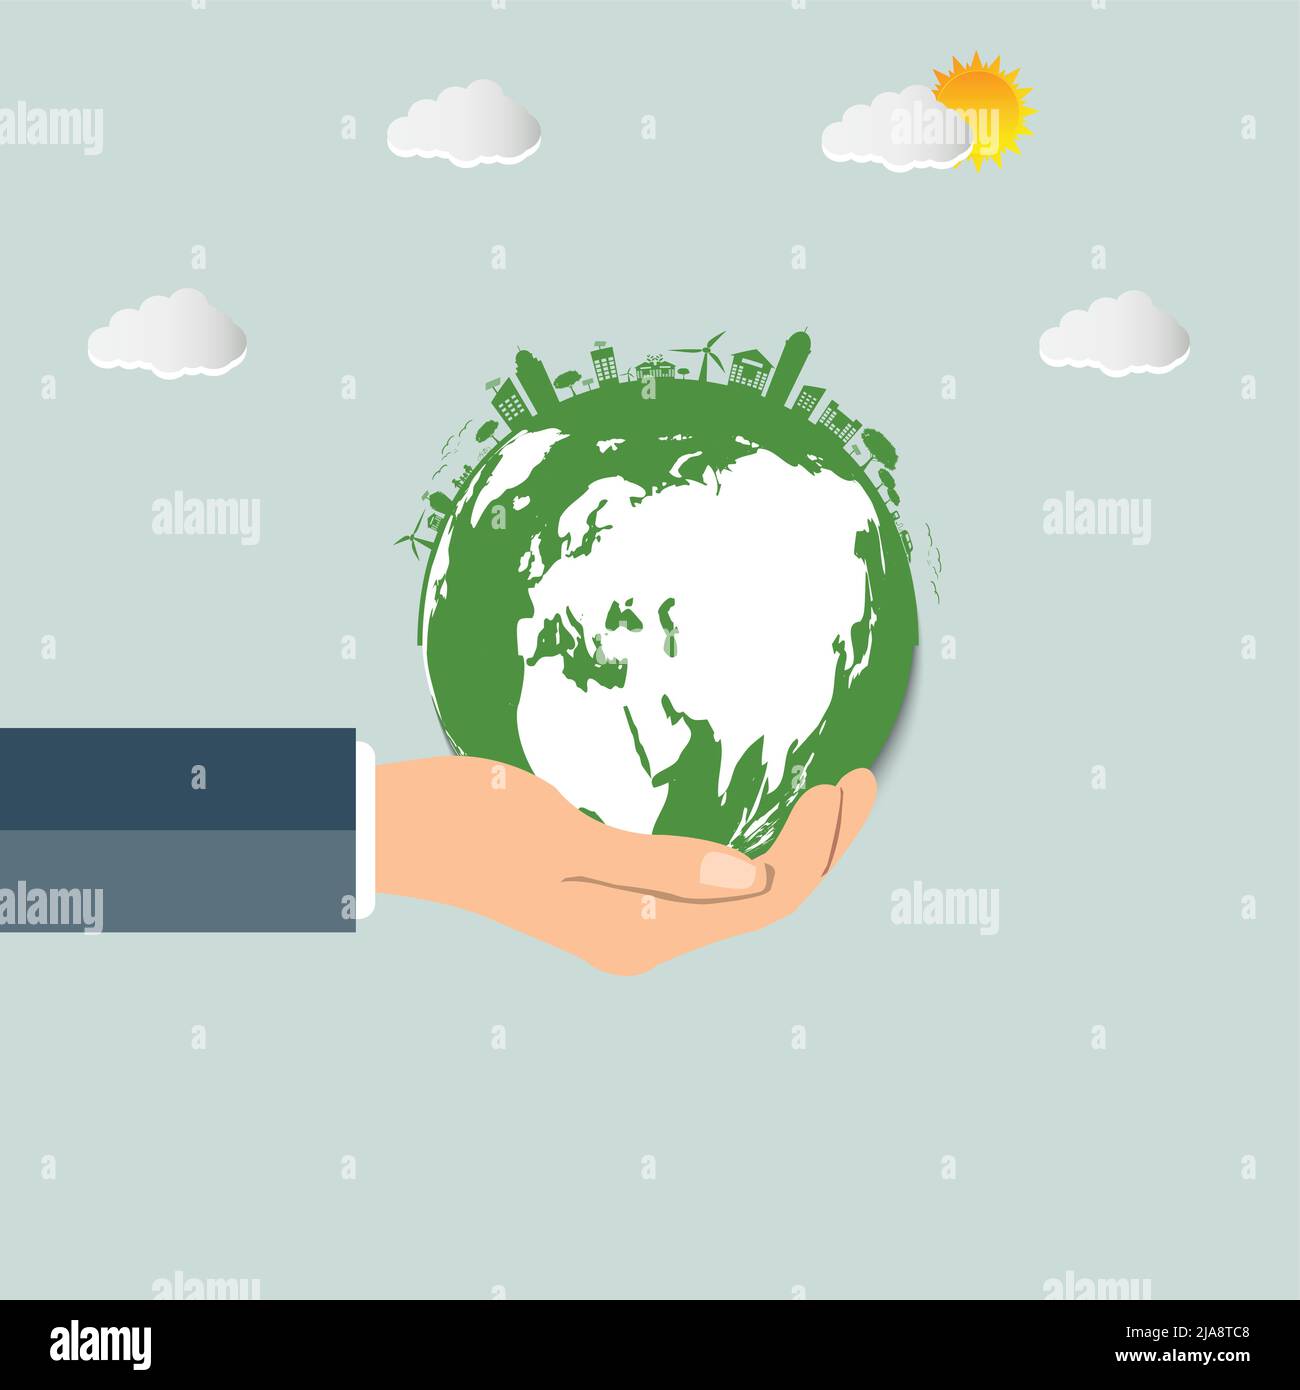 The world in your hands ecology concept.Green cities help the world with eco-friendly concept idea.with globe and tree background.vector illustration Stock Vector